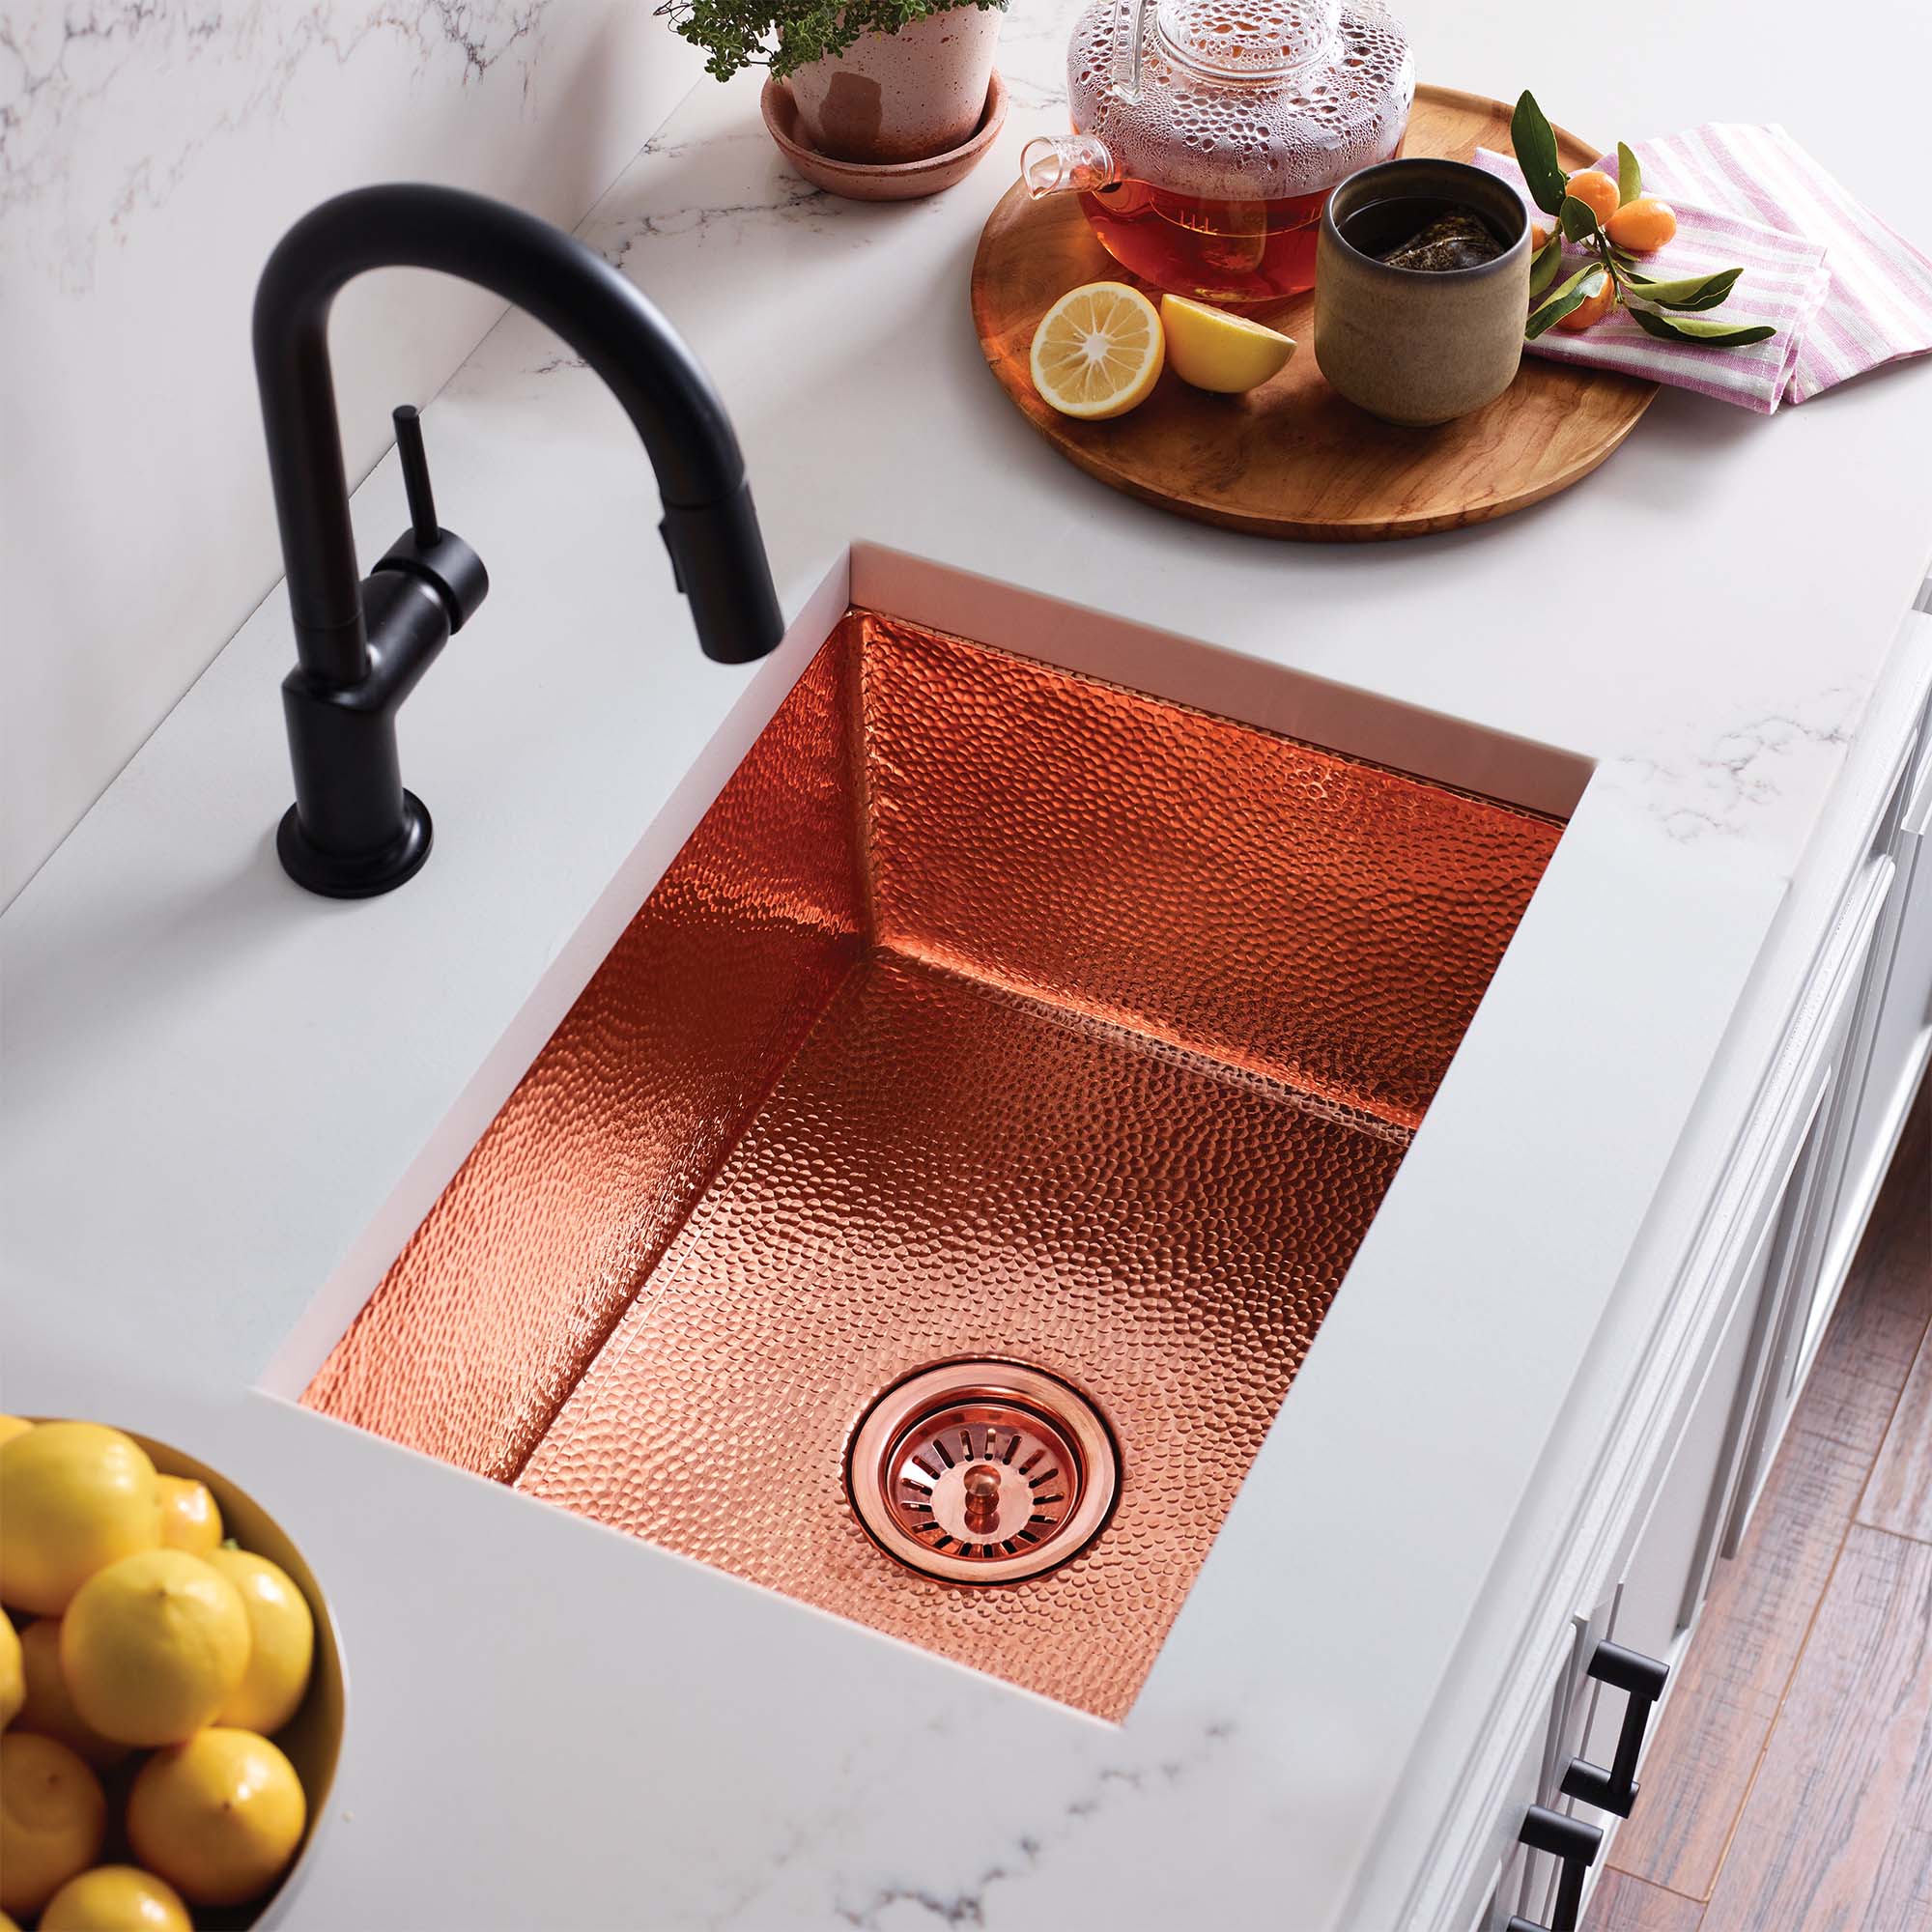 Cheap Copper Kitchen Sinks – Things In The Kitchen